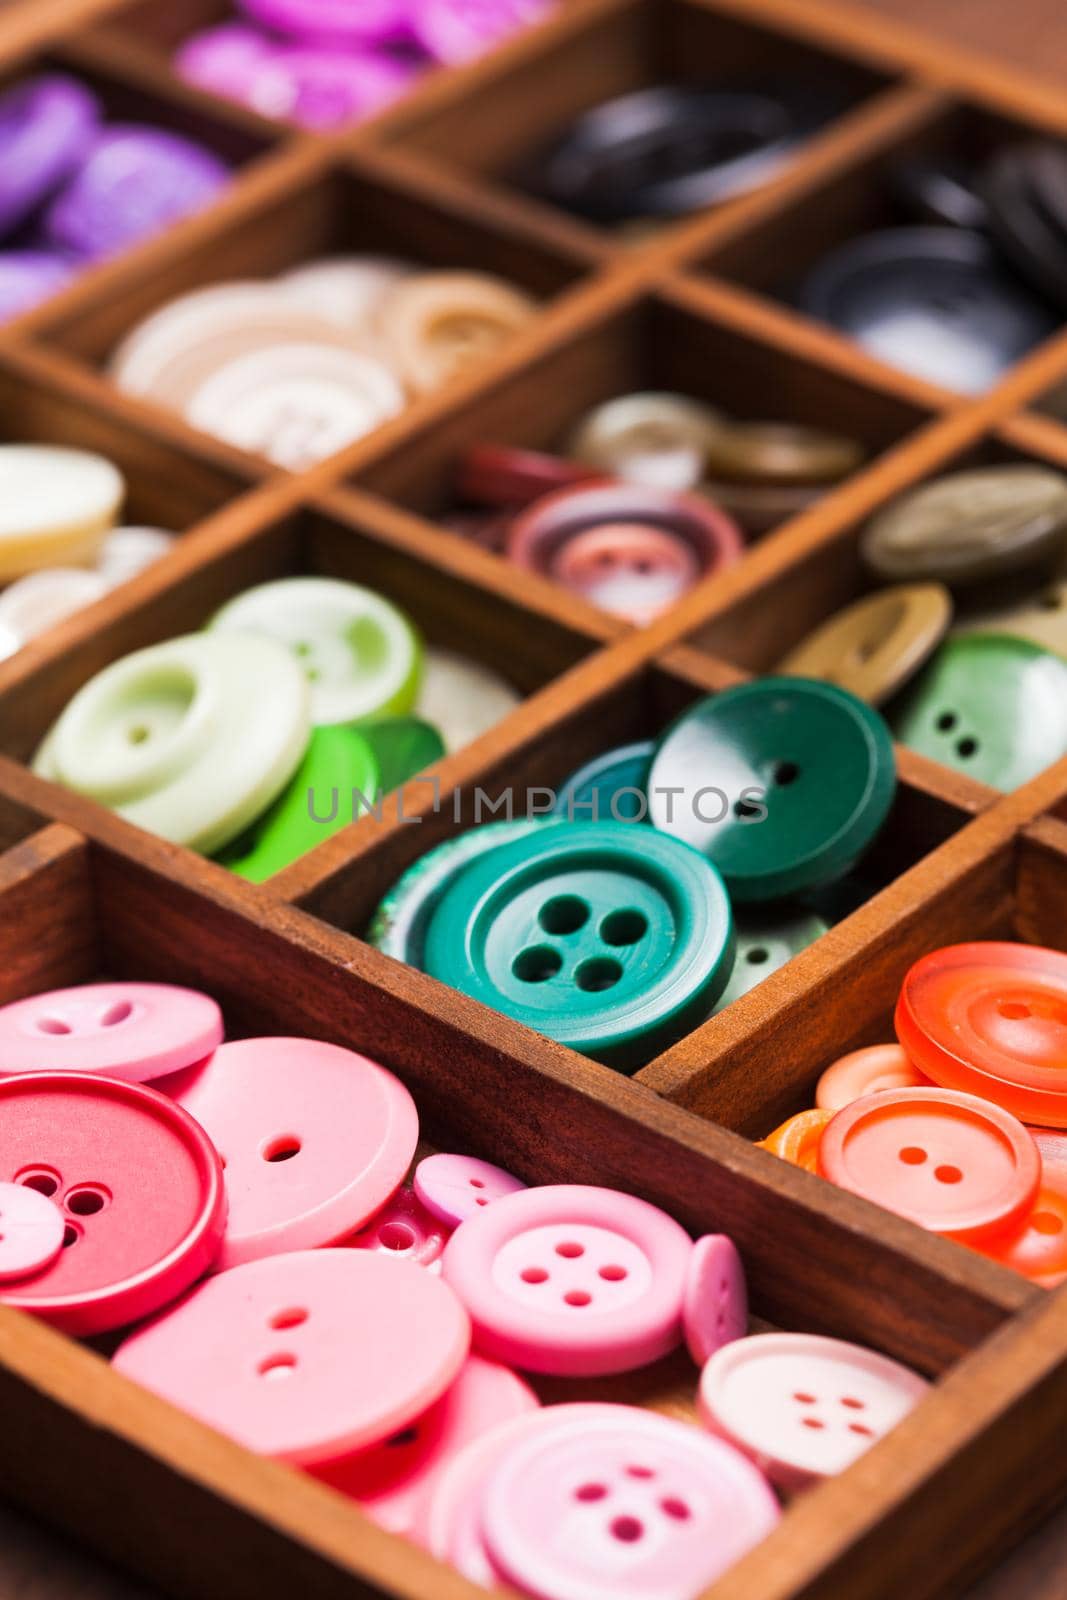 Colorful buttons in a wooden box for design